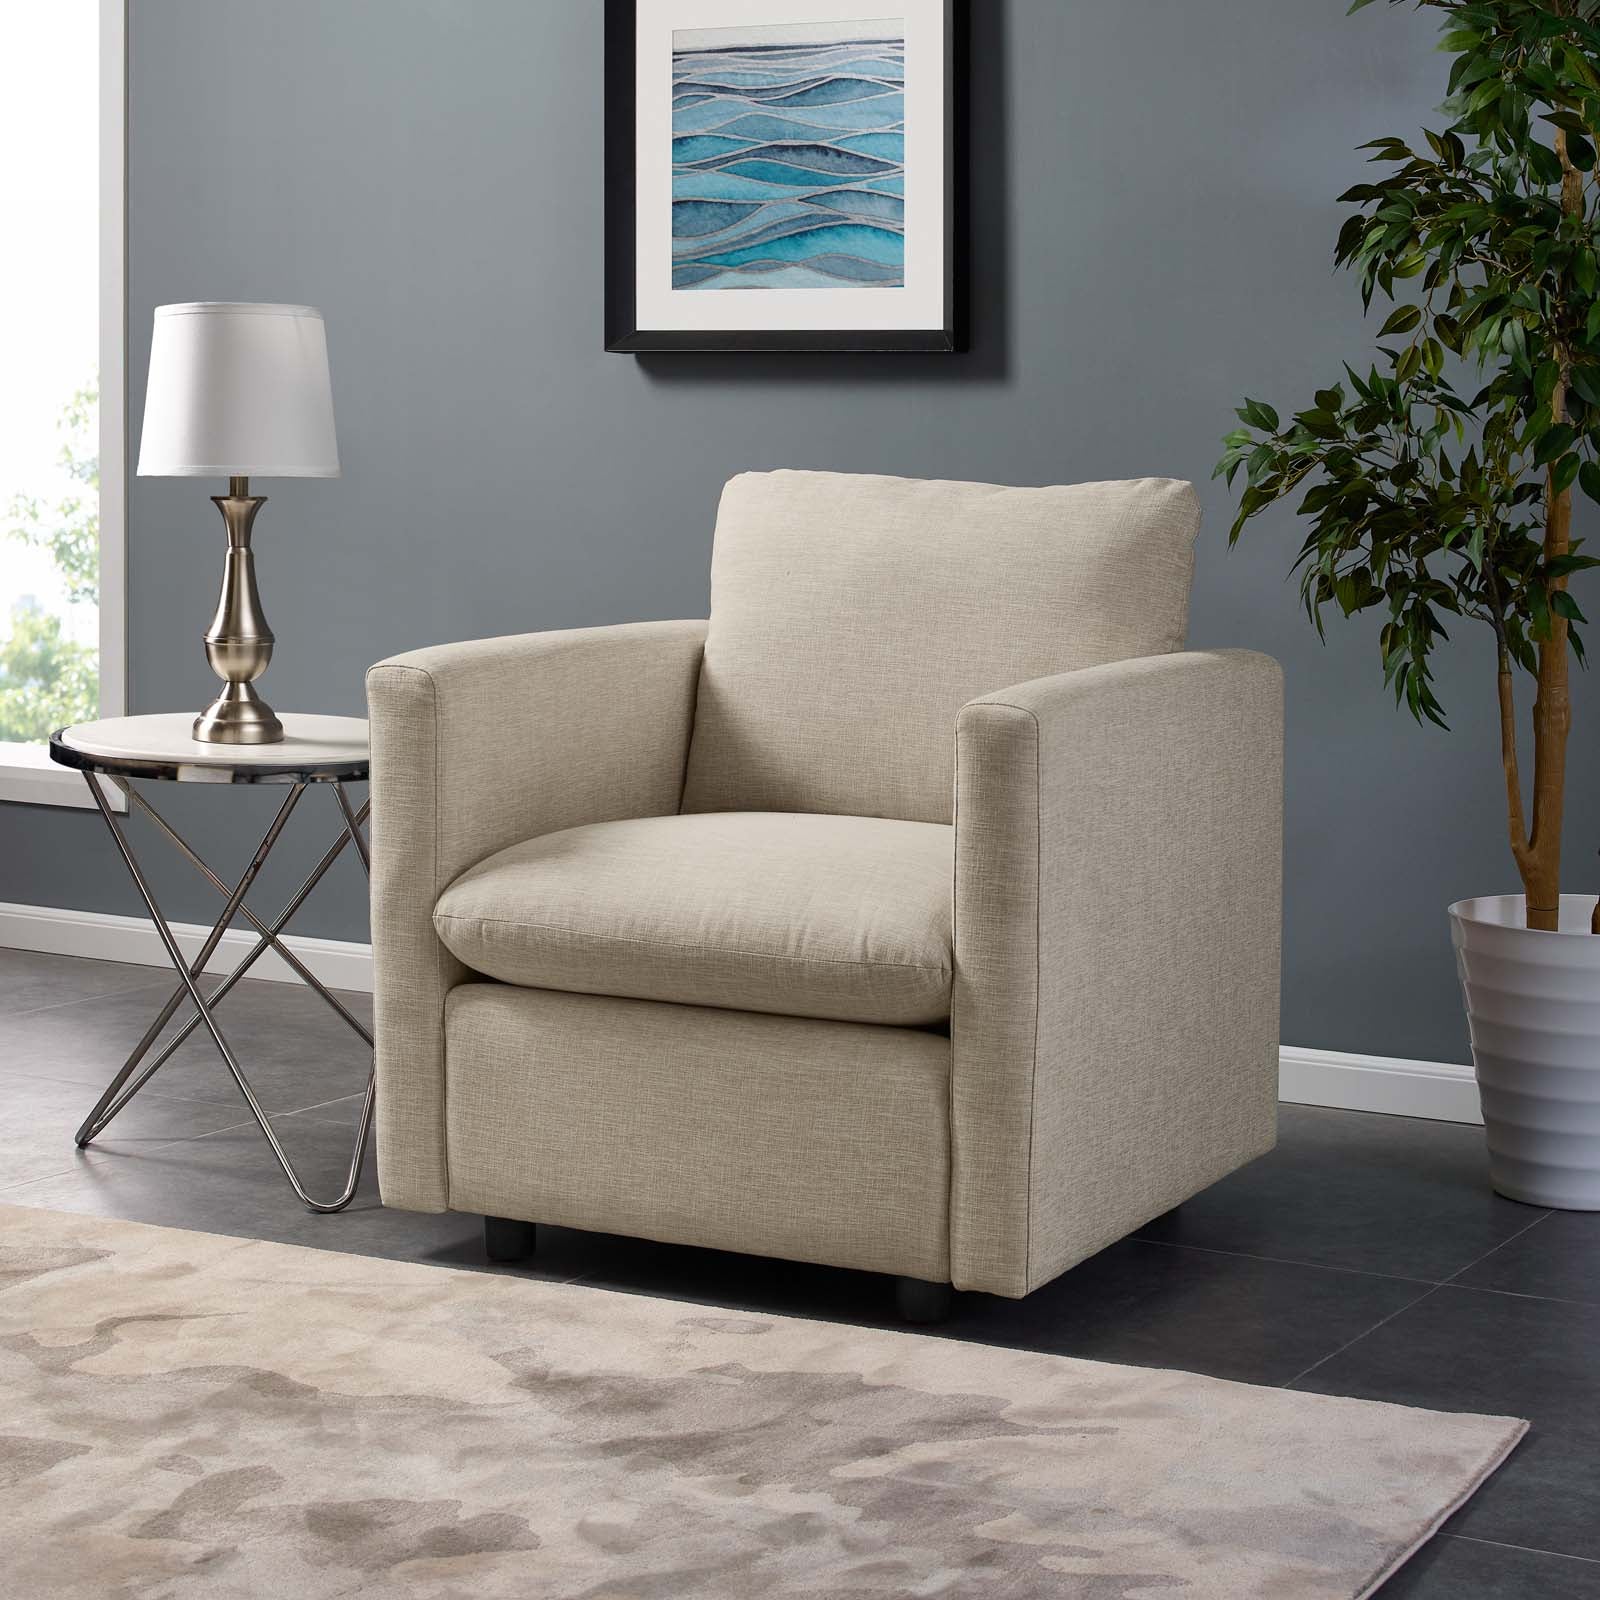 Activate Upholstered Fabric Armchair - Beige